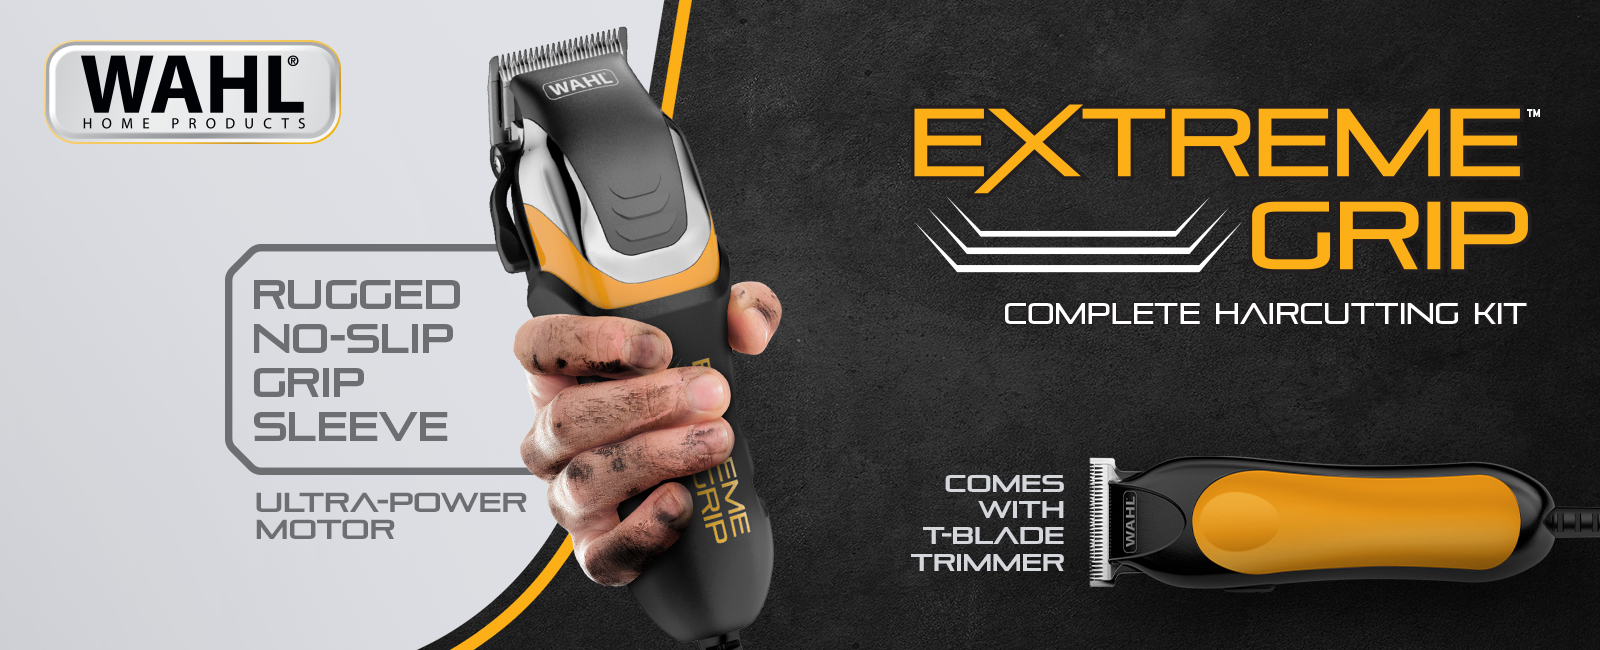 wahl extreme grip clipper kit